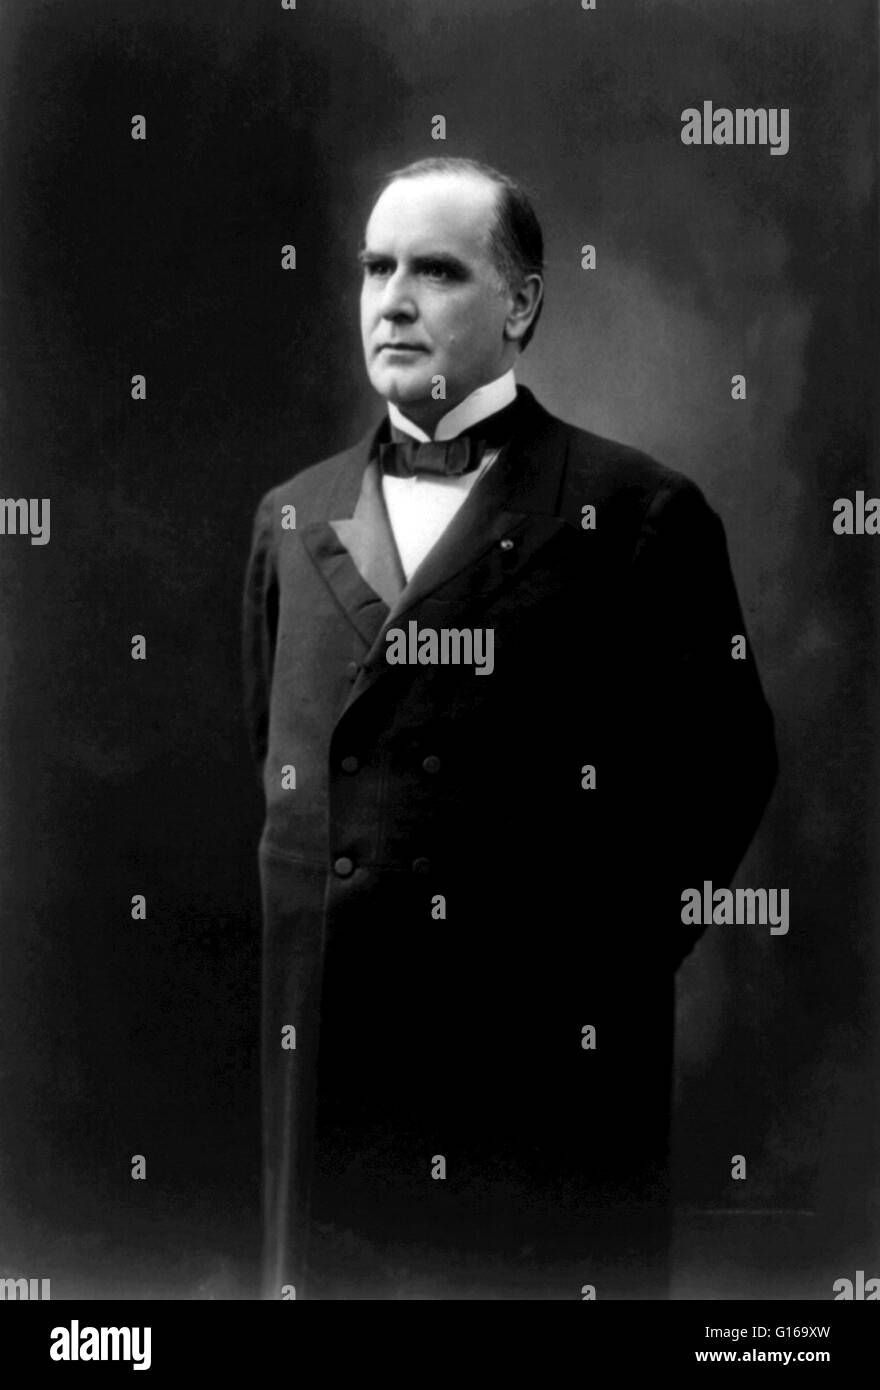 William McKinley (January 29, 1843 - September 14, 1901) was the 25th President of the United States (1897-1901). He was the last President to have served in the American Civil War. After the war, he settled in Ohio, where he practiced law and married Ida Stock Photo